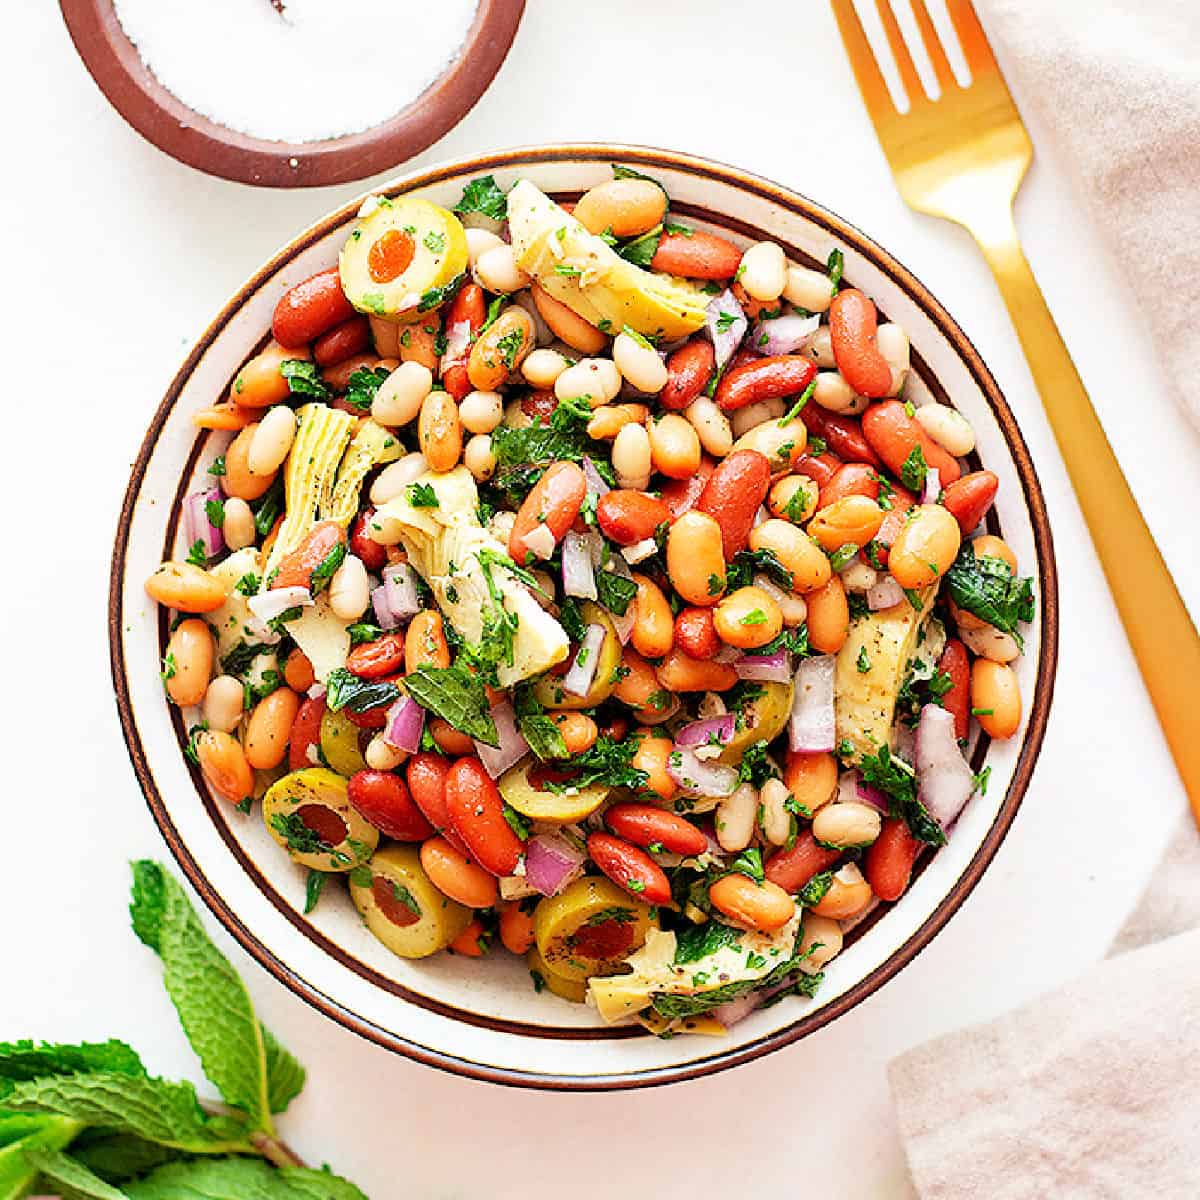 An easy three bean salad recipe with a Mediterranean twist. This protein-packed vegan salad is perfect for meal prep or as a side dish. Make sure to watch the video for step-by-step instructions. 